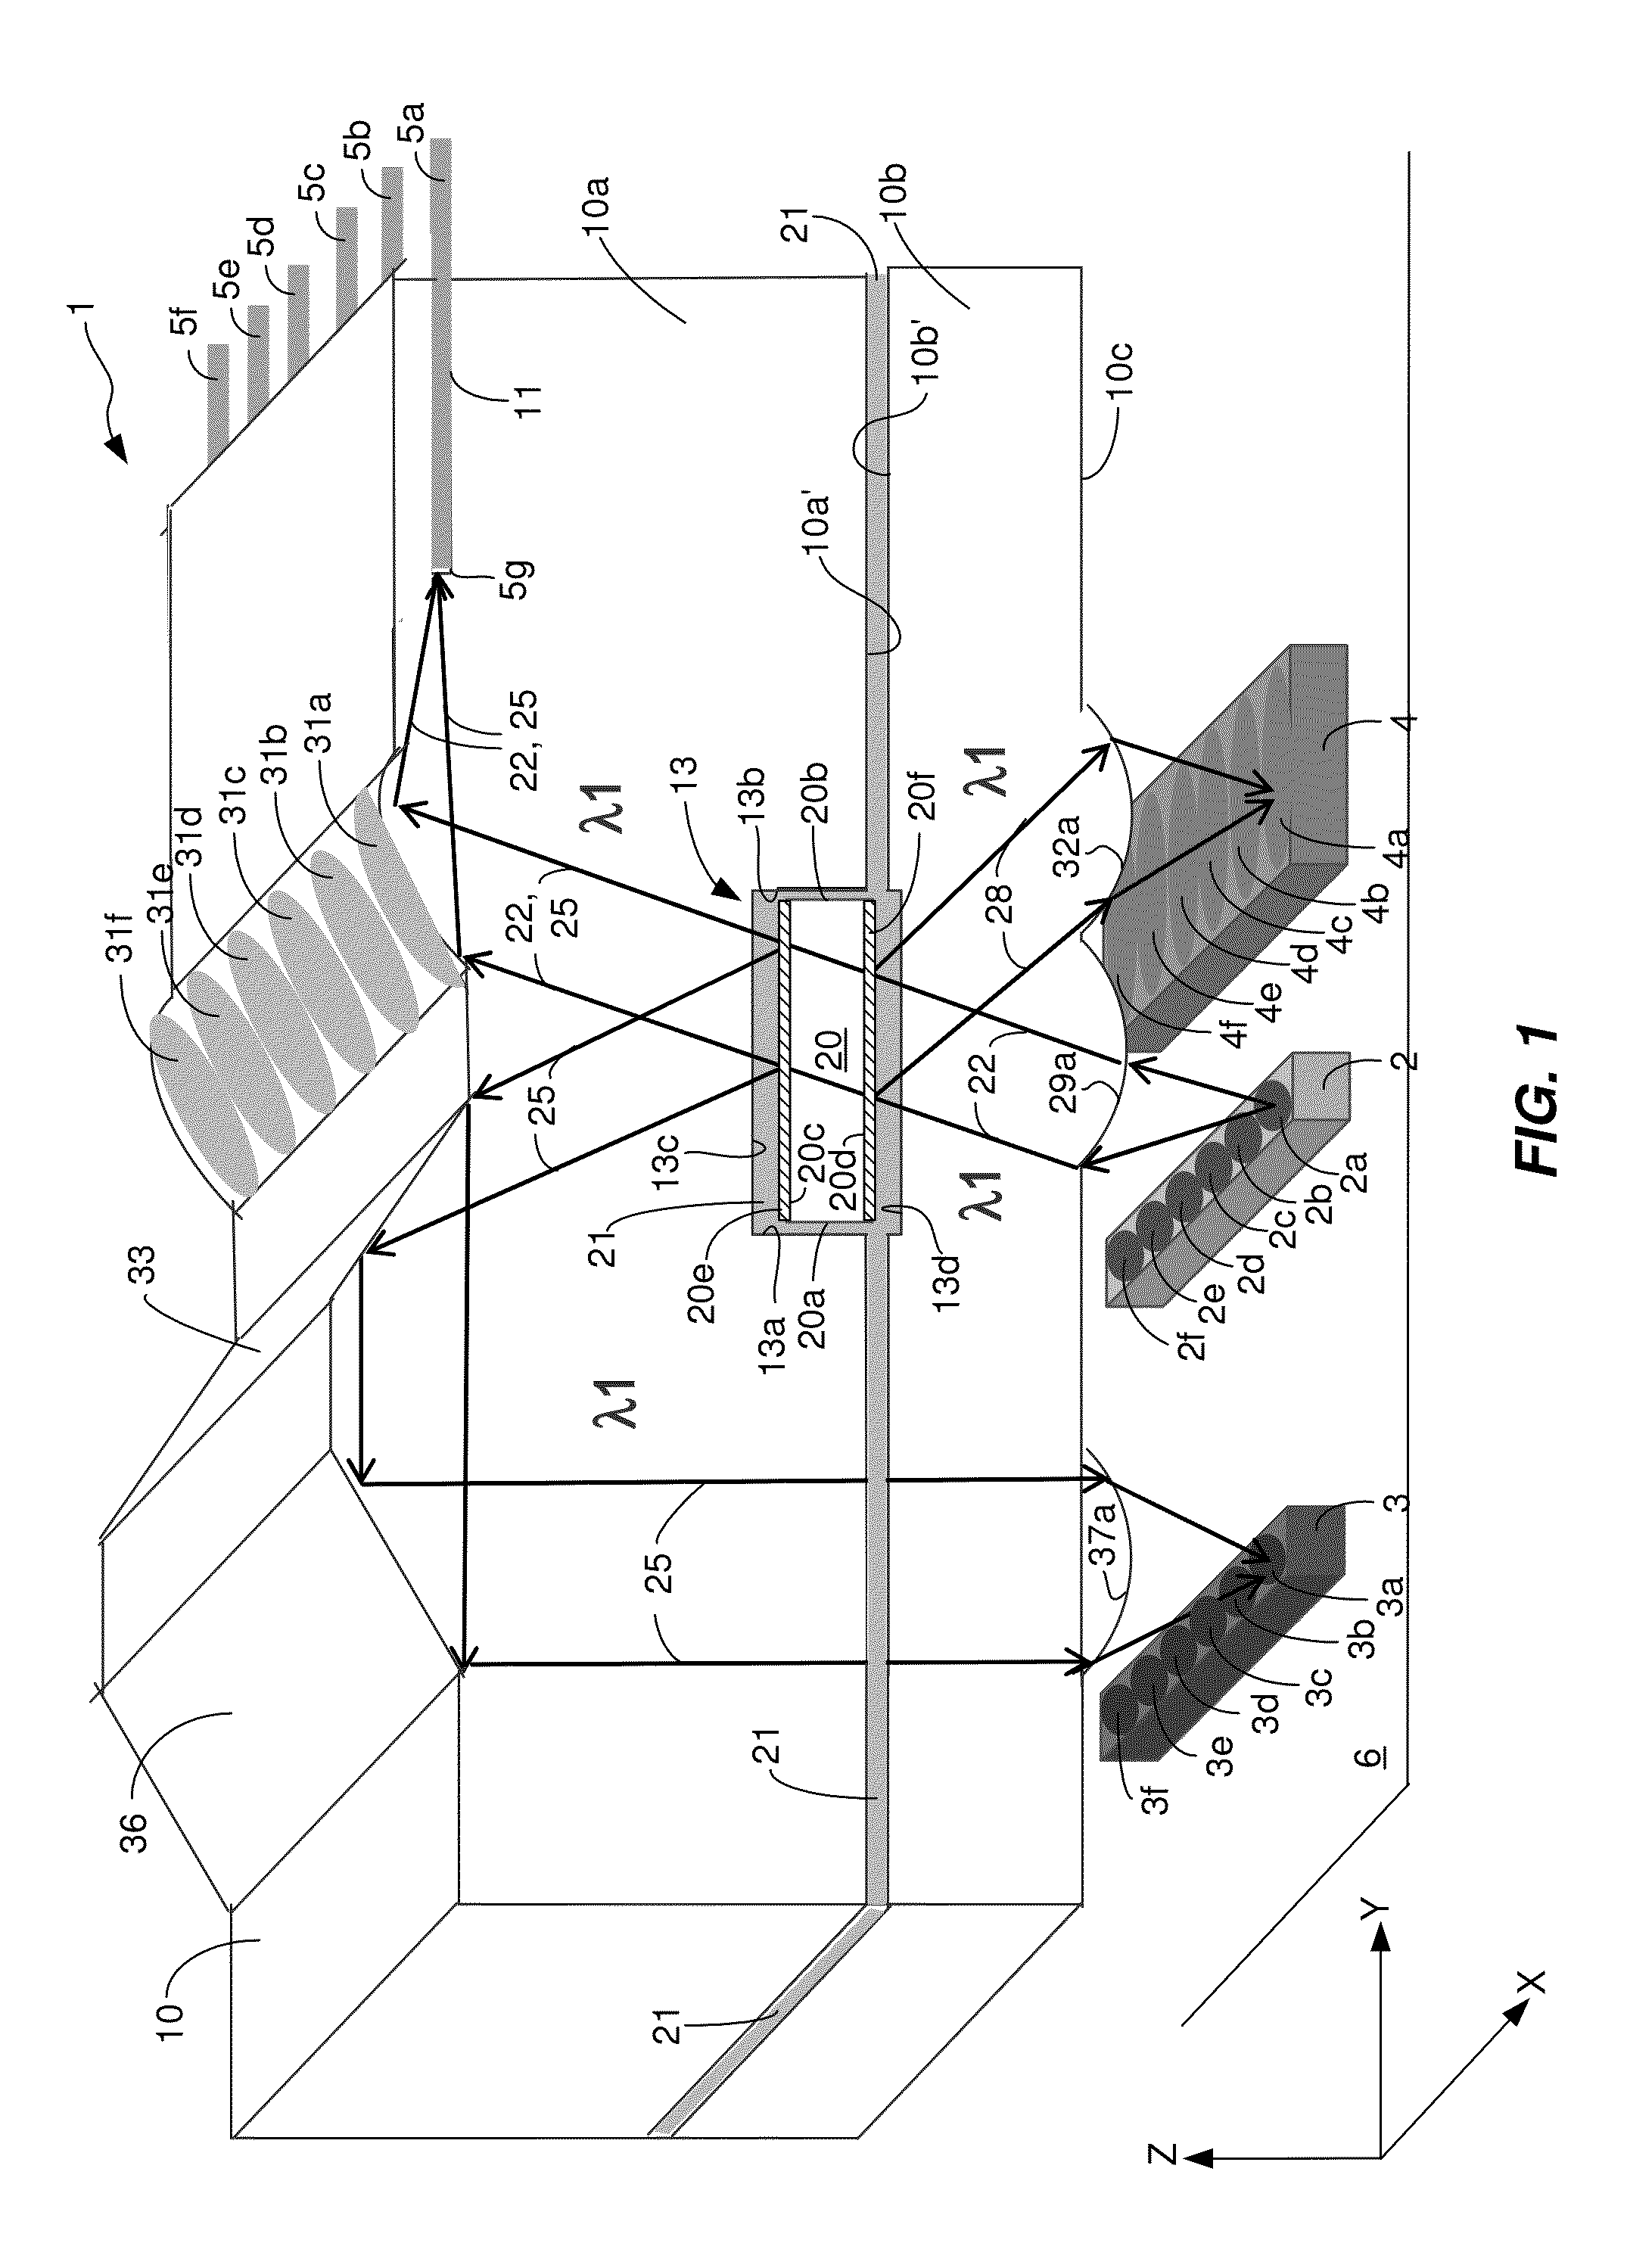 Bidirectional parallel optical transceiver module and a method for bidirectionally communicating optical signals over an optical link